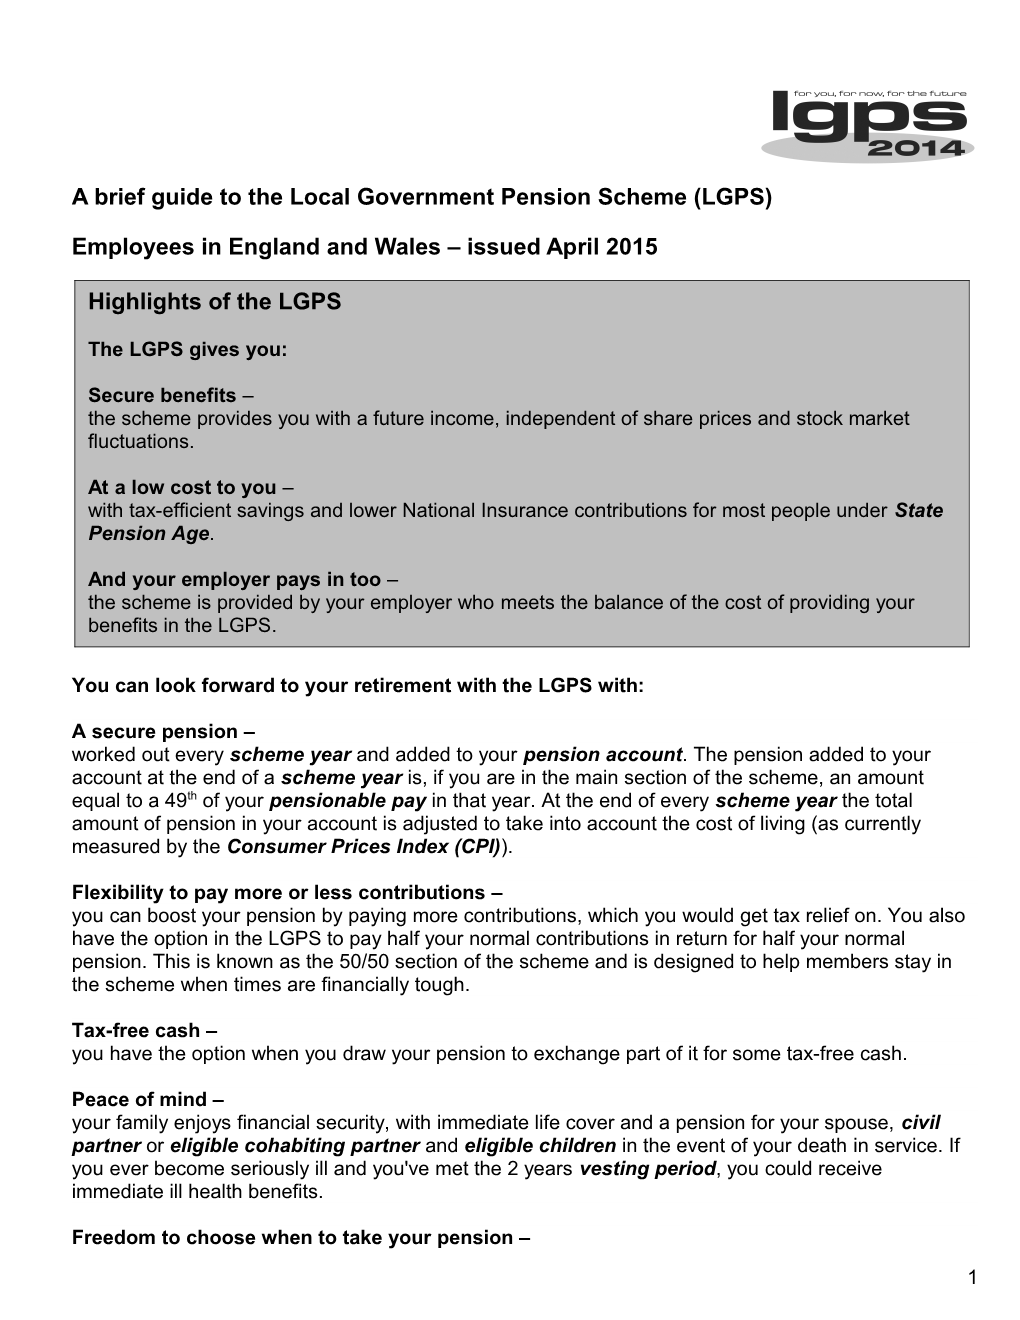 The Local Government Pension Scheme (LGPS) in England and Wales Brief Guide